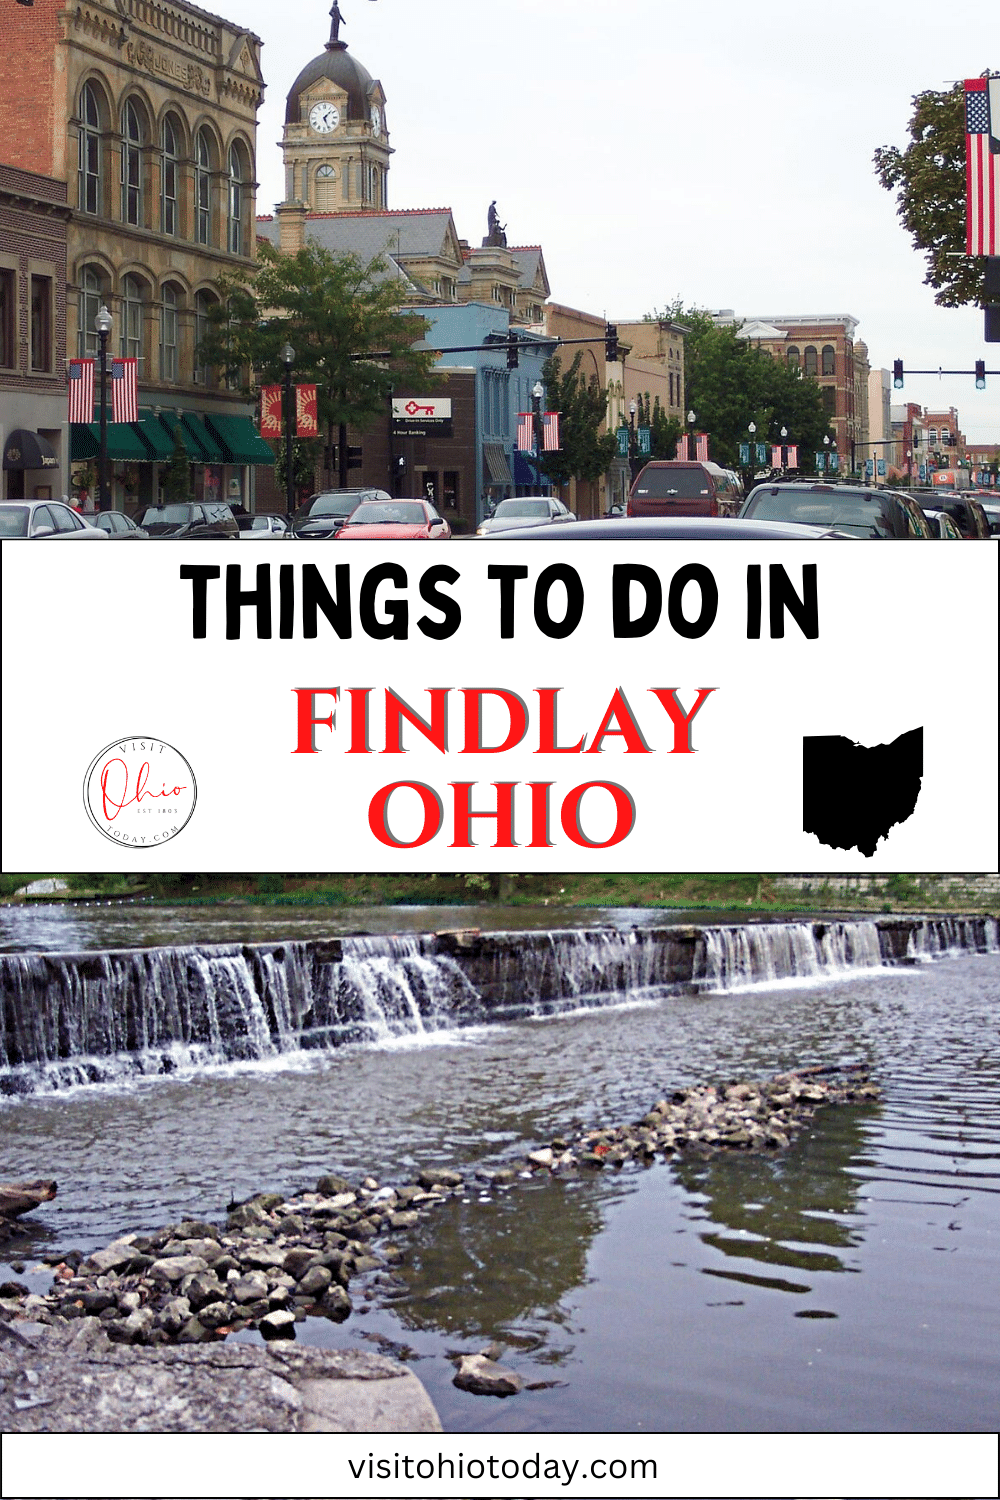 vertical image for pinterest with a photo of Main Street, Findlay, Ohio at the top, and a photo of a waterfall in Findlay at the bottom. A white strip across the middle has the text Things to do in Findlay Ohio. Images from Wikimedia Commons, Public Domain images